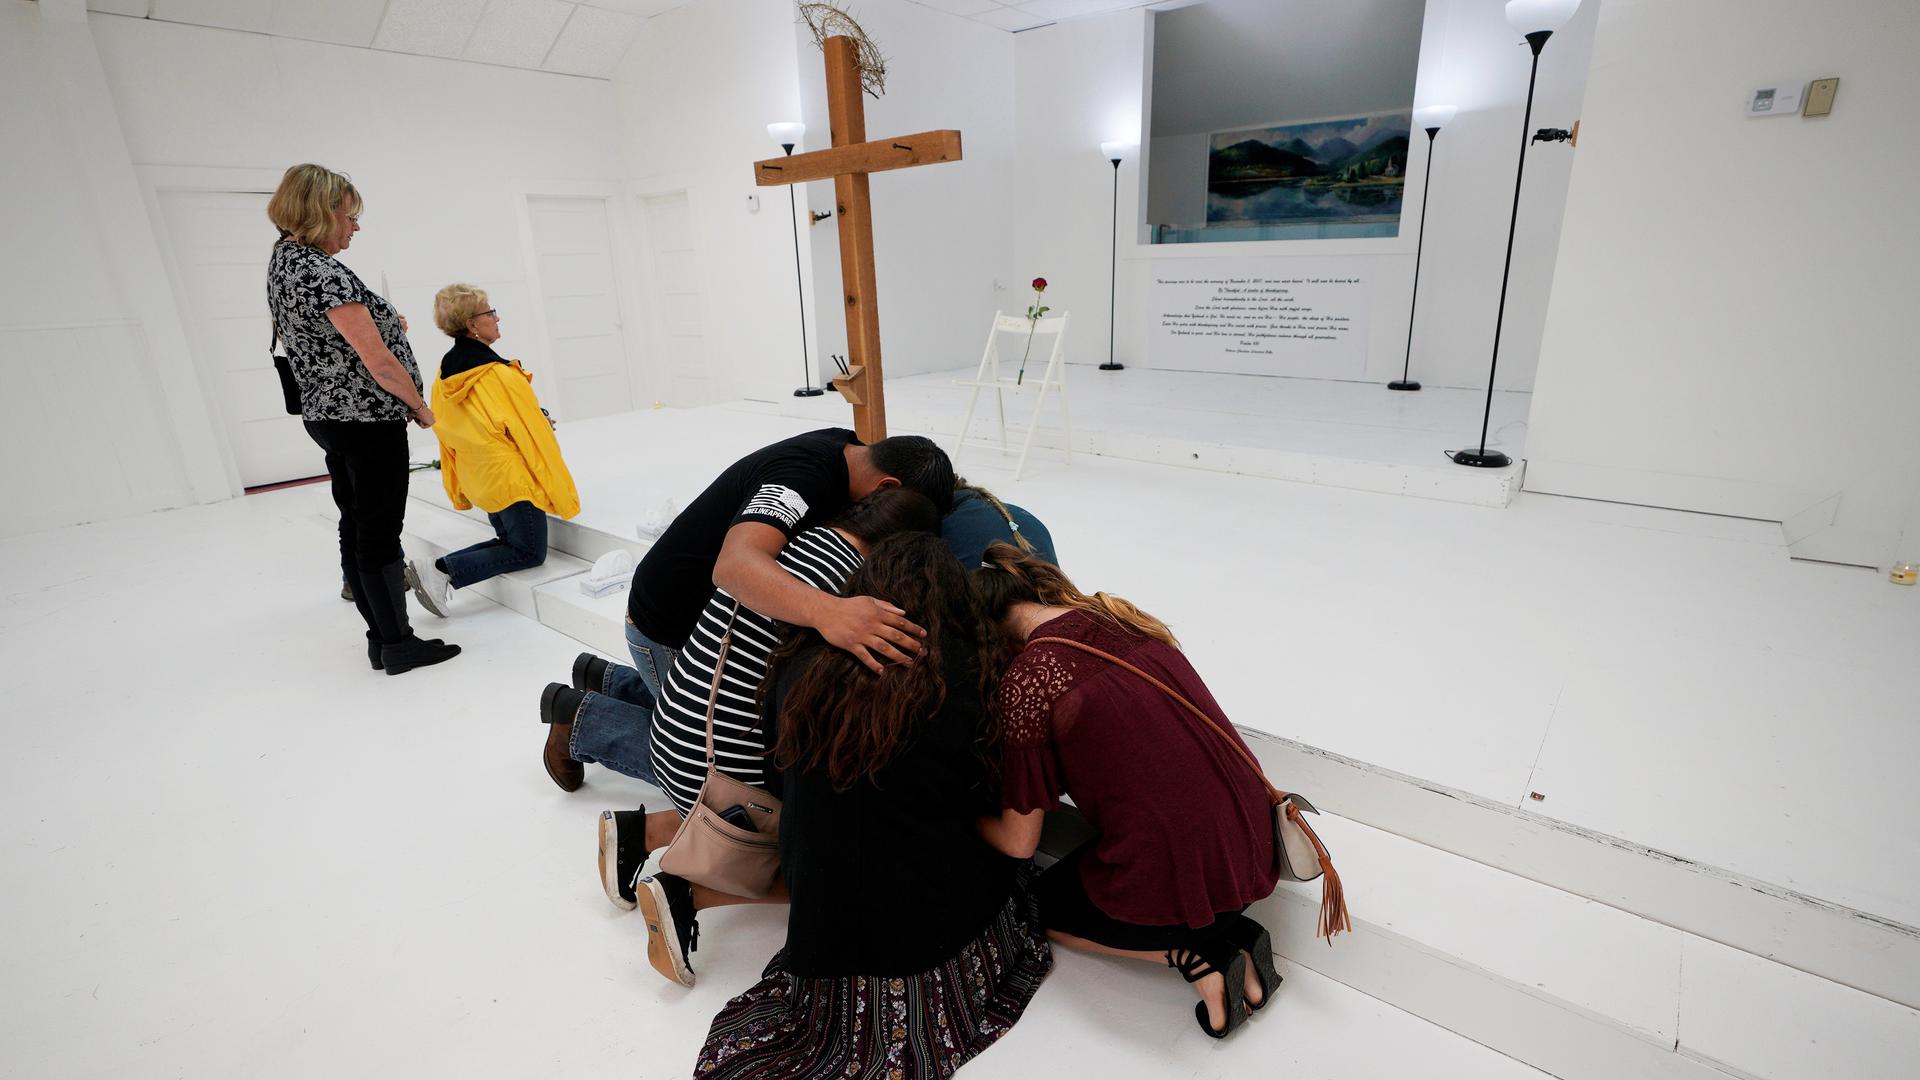 People pray in the First Baptist Church of Sutherland Springs where 26 people were killed in a shooting attack on November 5, 2017. The church was opened to the public as a memorial to those killed.